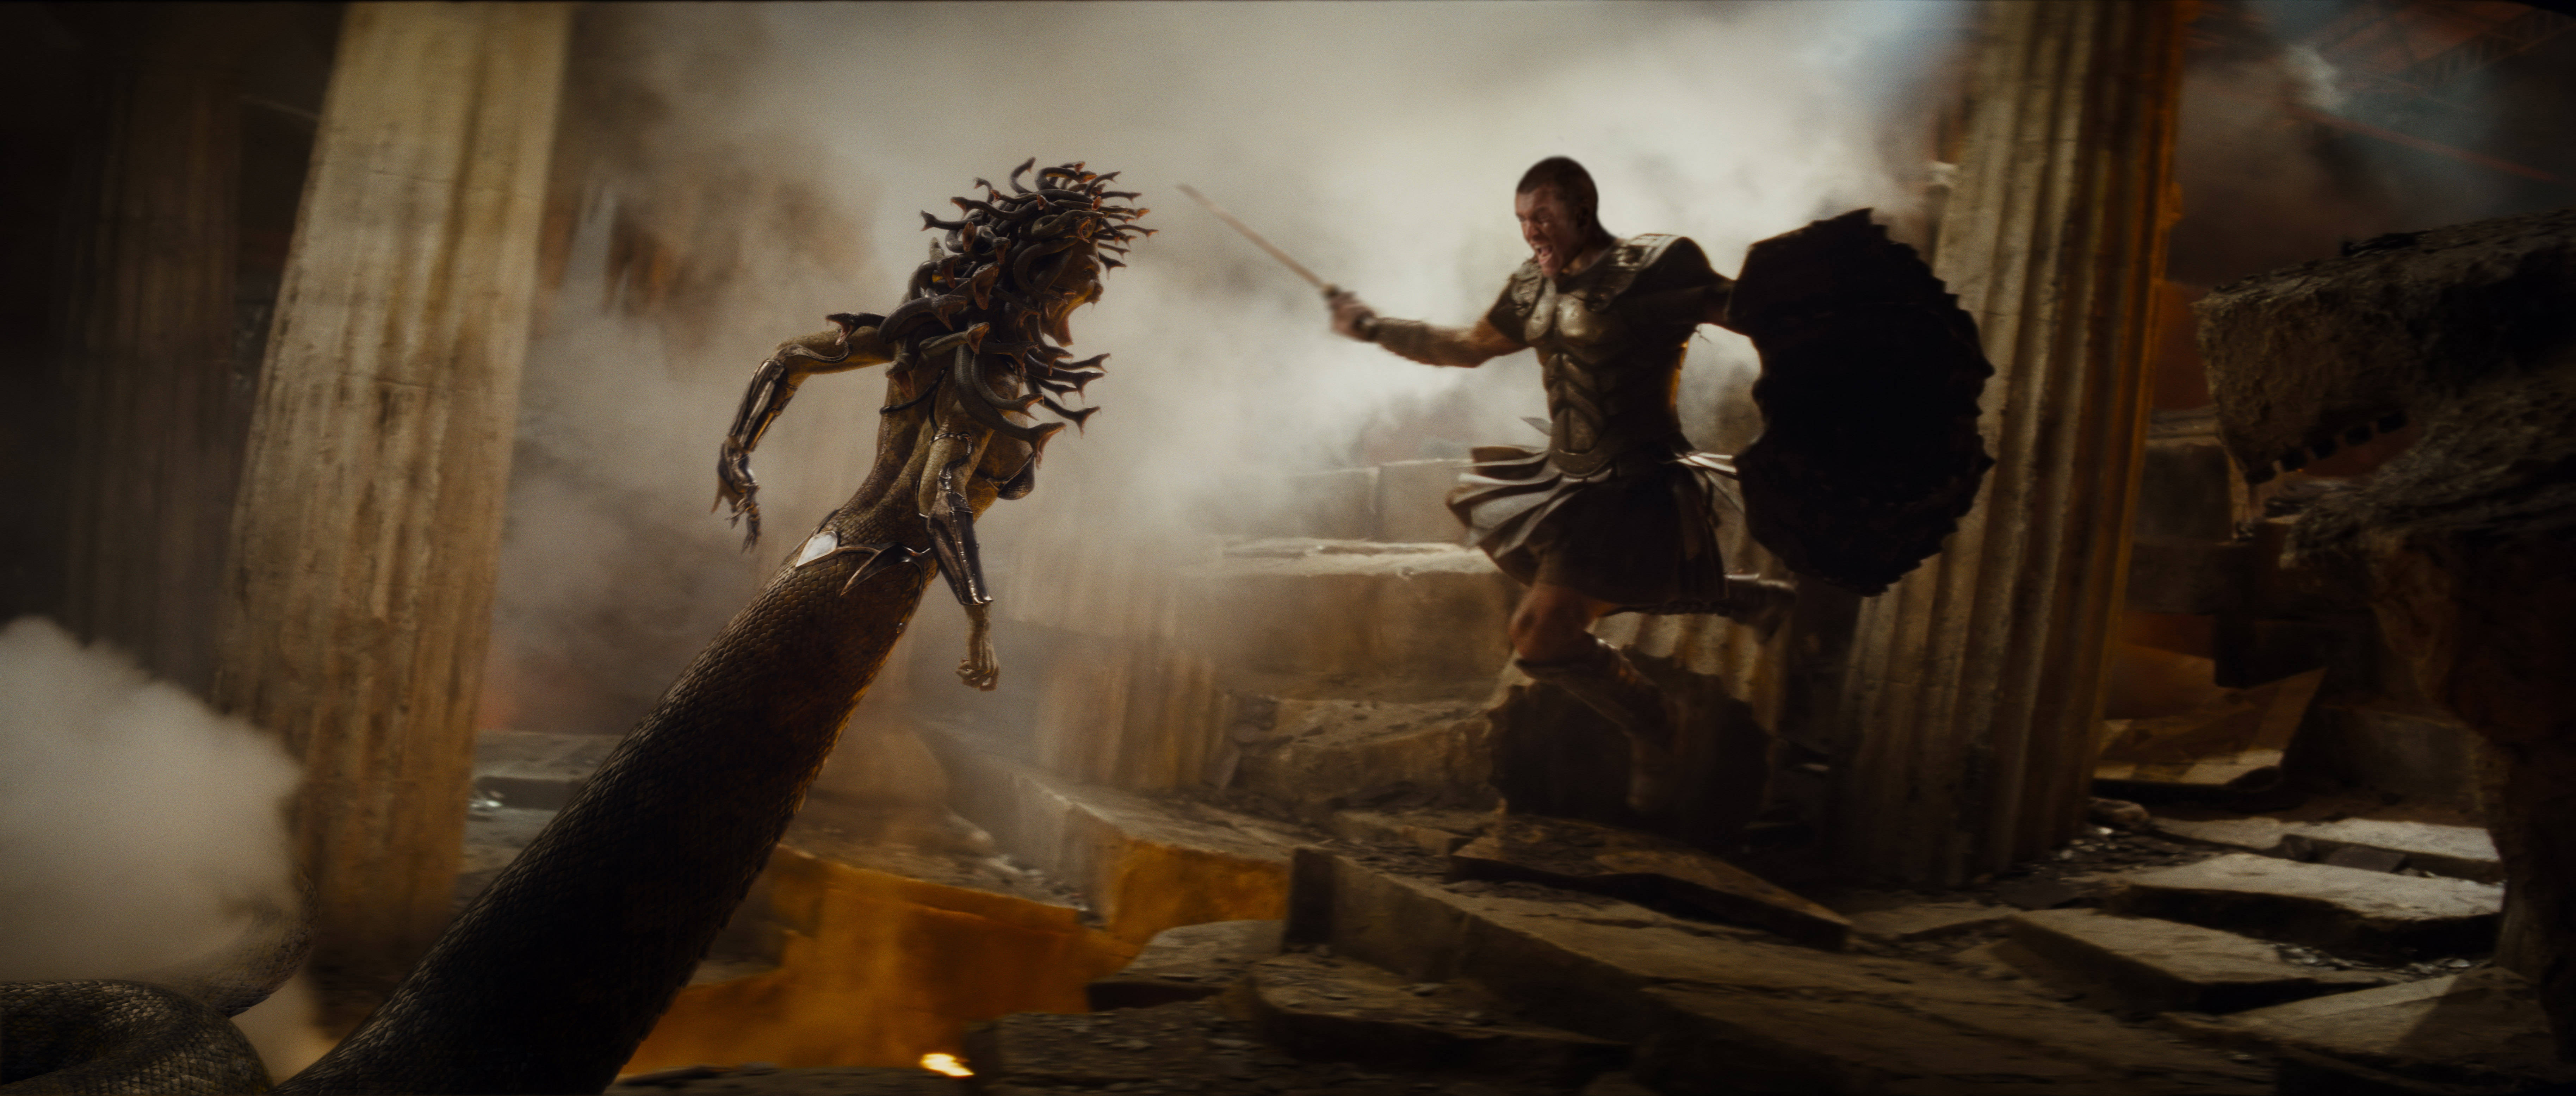 Clash Of The Titans (2010) HD wallpapers, Desktop wallpaper - most viewed